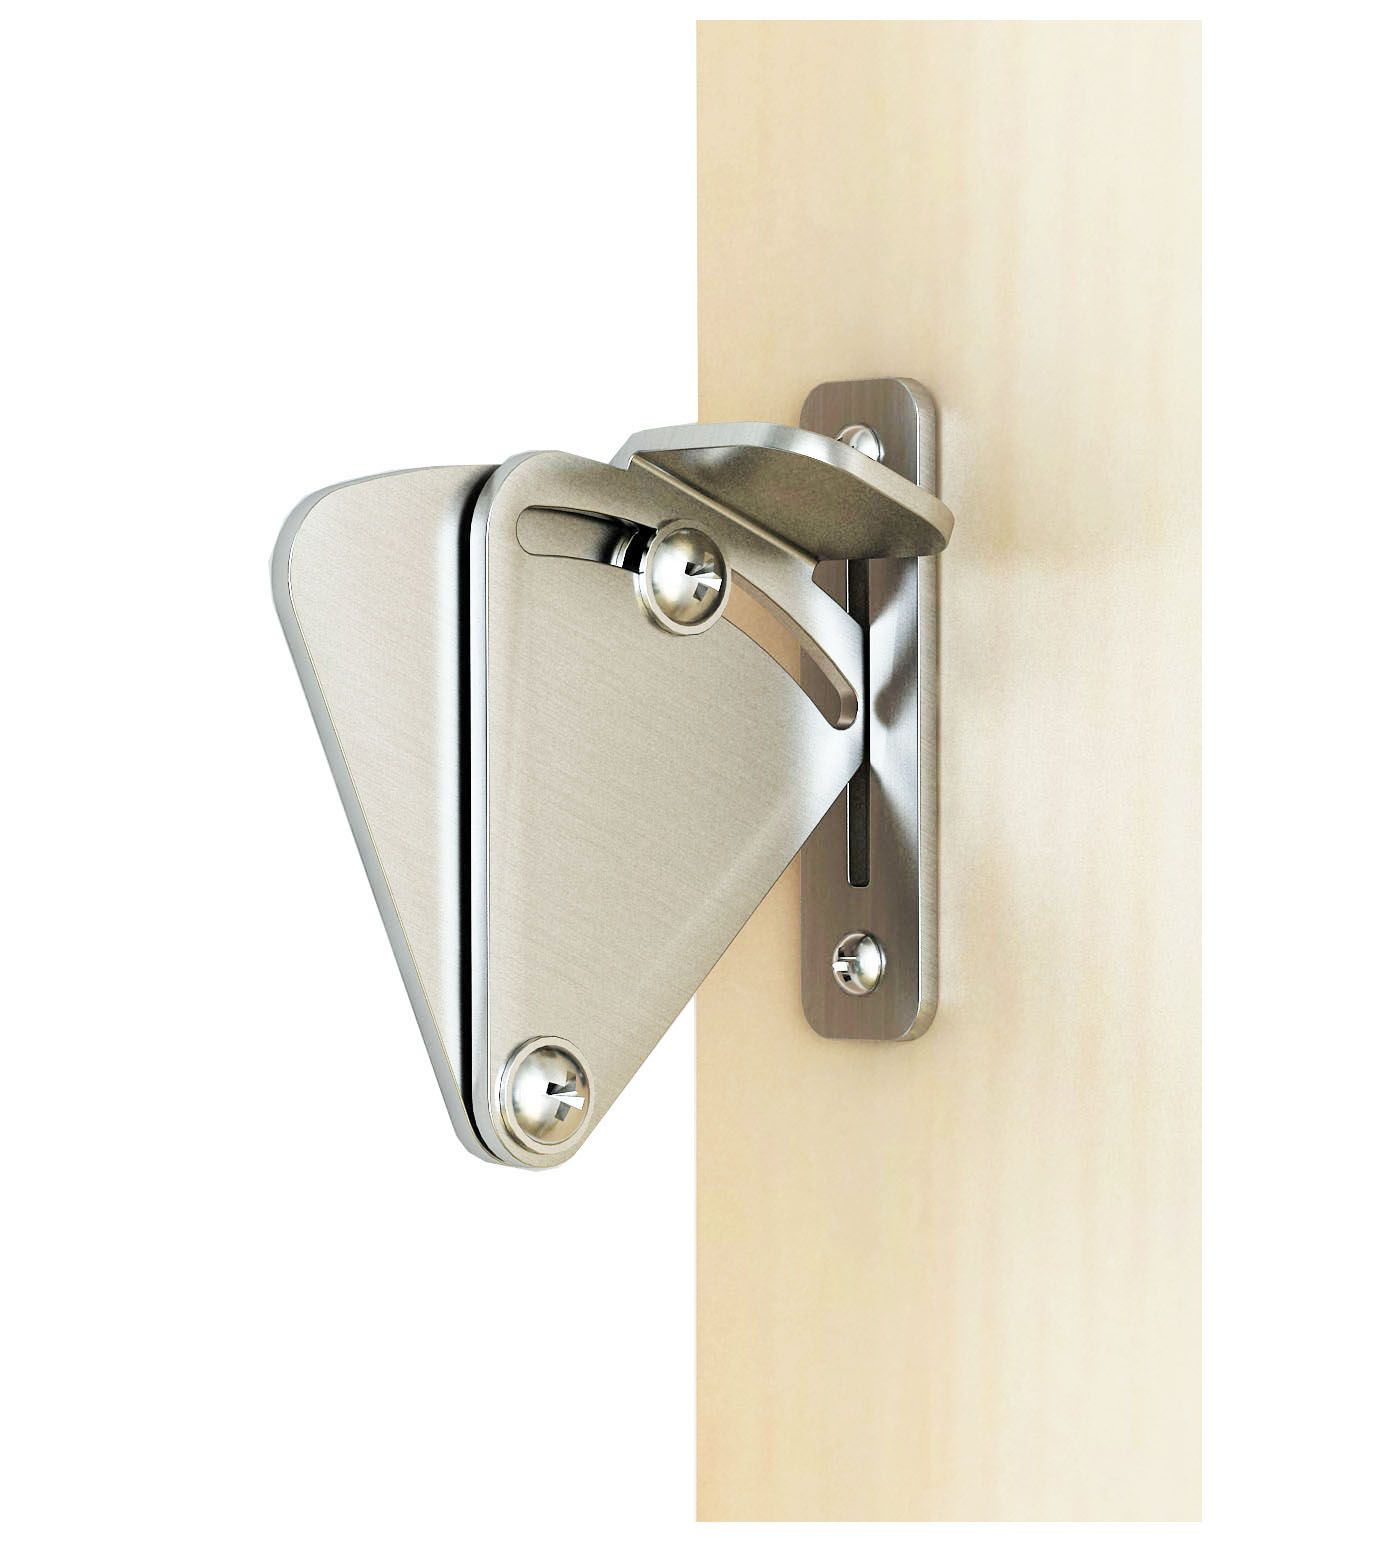 2019 Diyhd Stainless Steel Sliding Barn Door Lock Interior Wood Sliding Door Latch With Stepping Pin Sandwiched From Diyhd 9 95 Dhgate Com